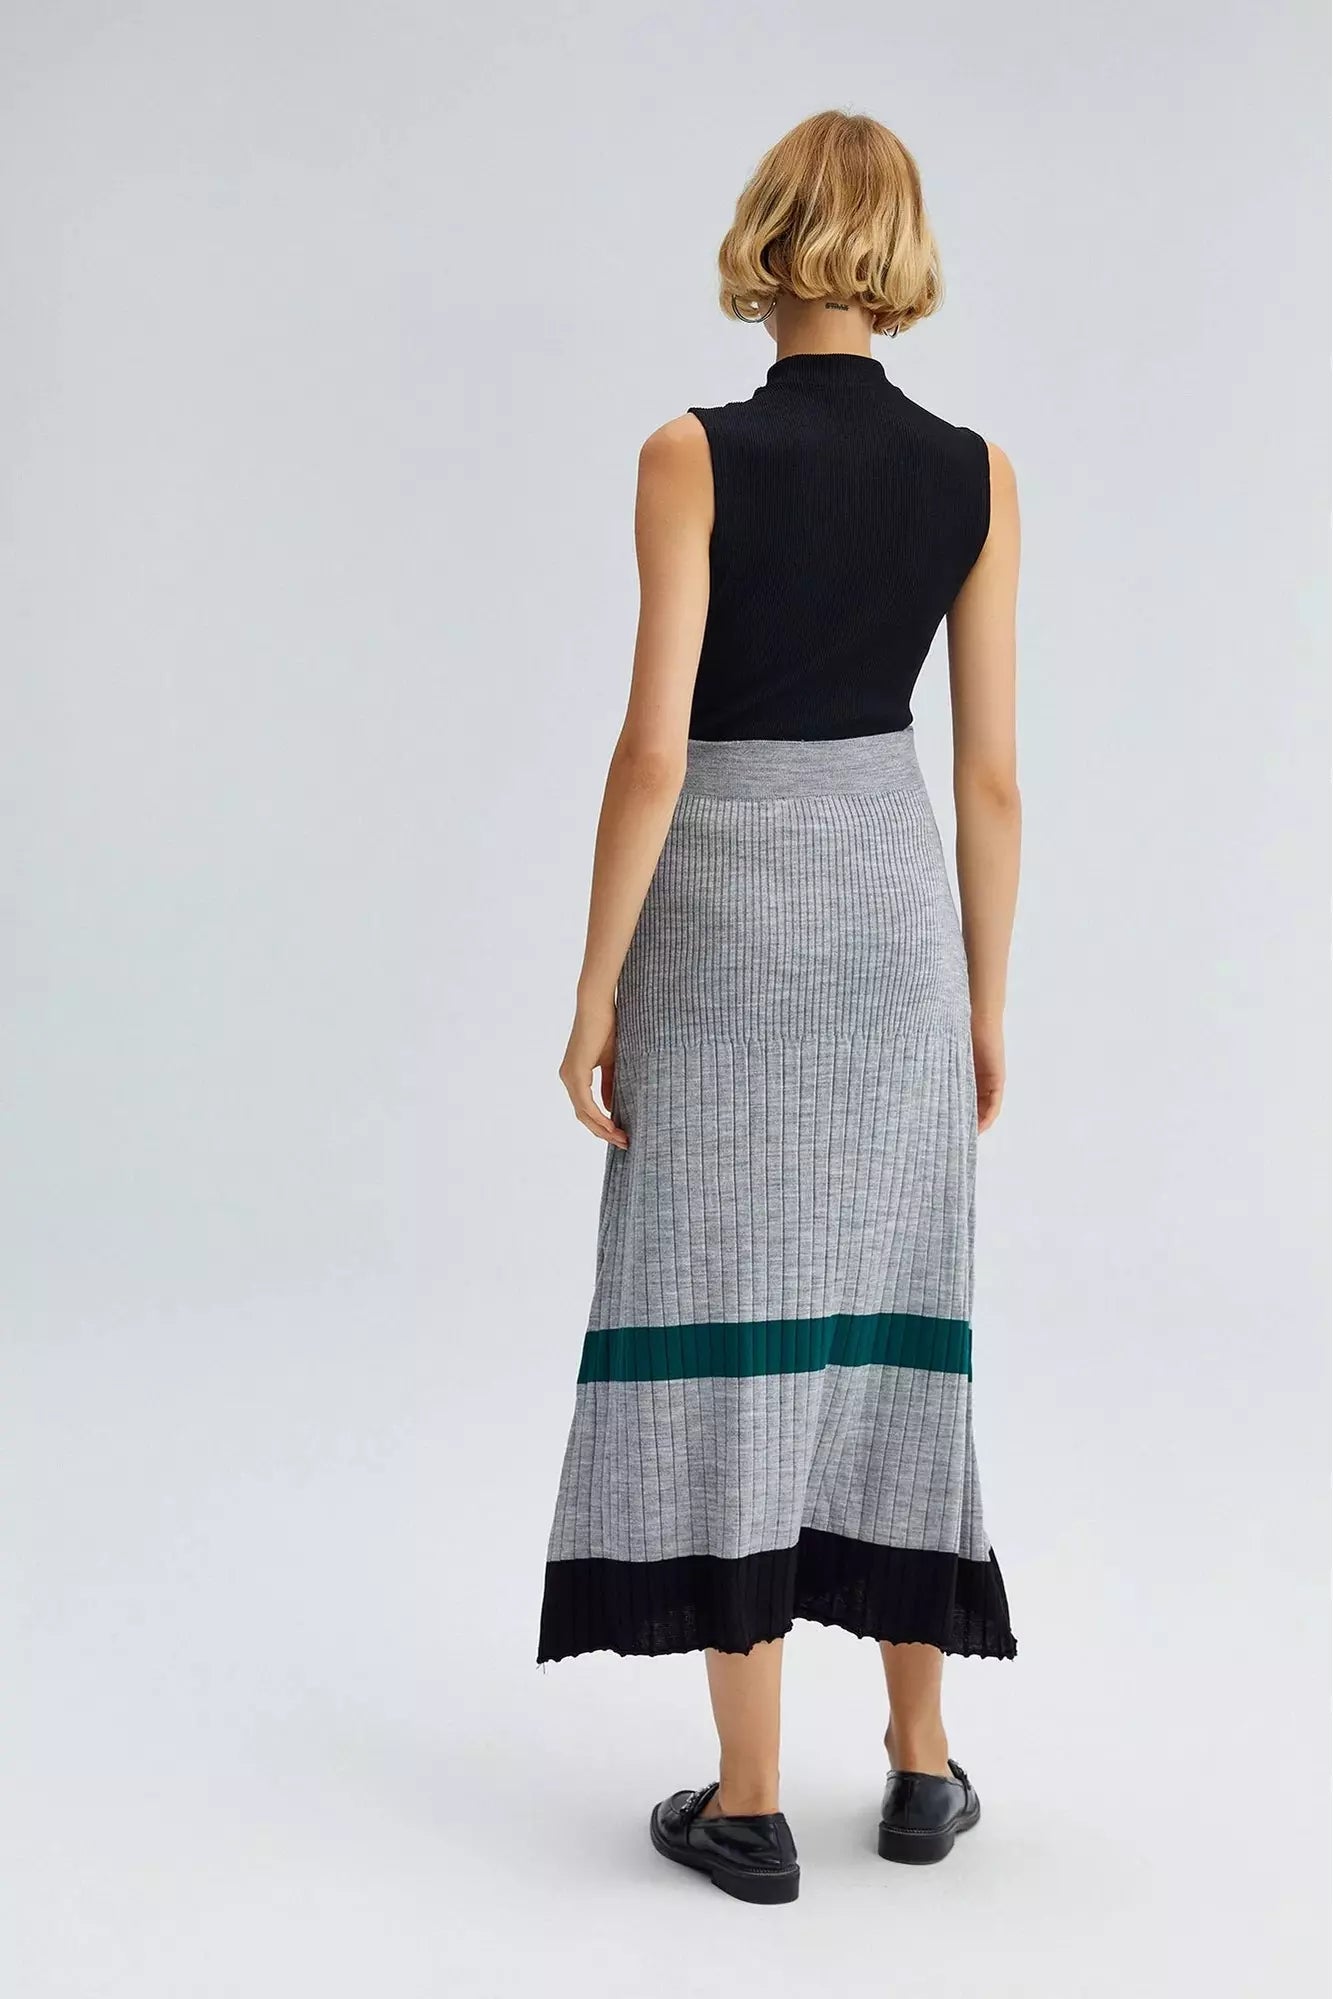 Knit Skirt - in Stripes - By Baano